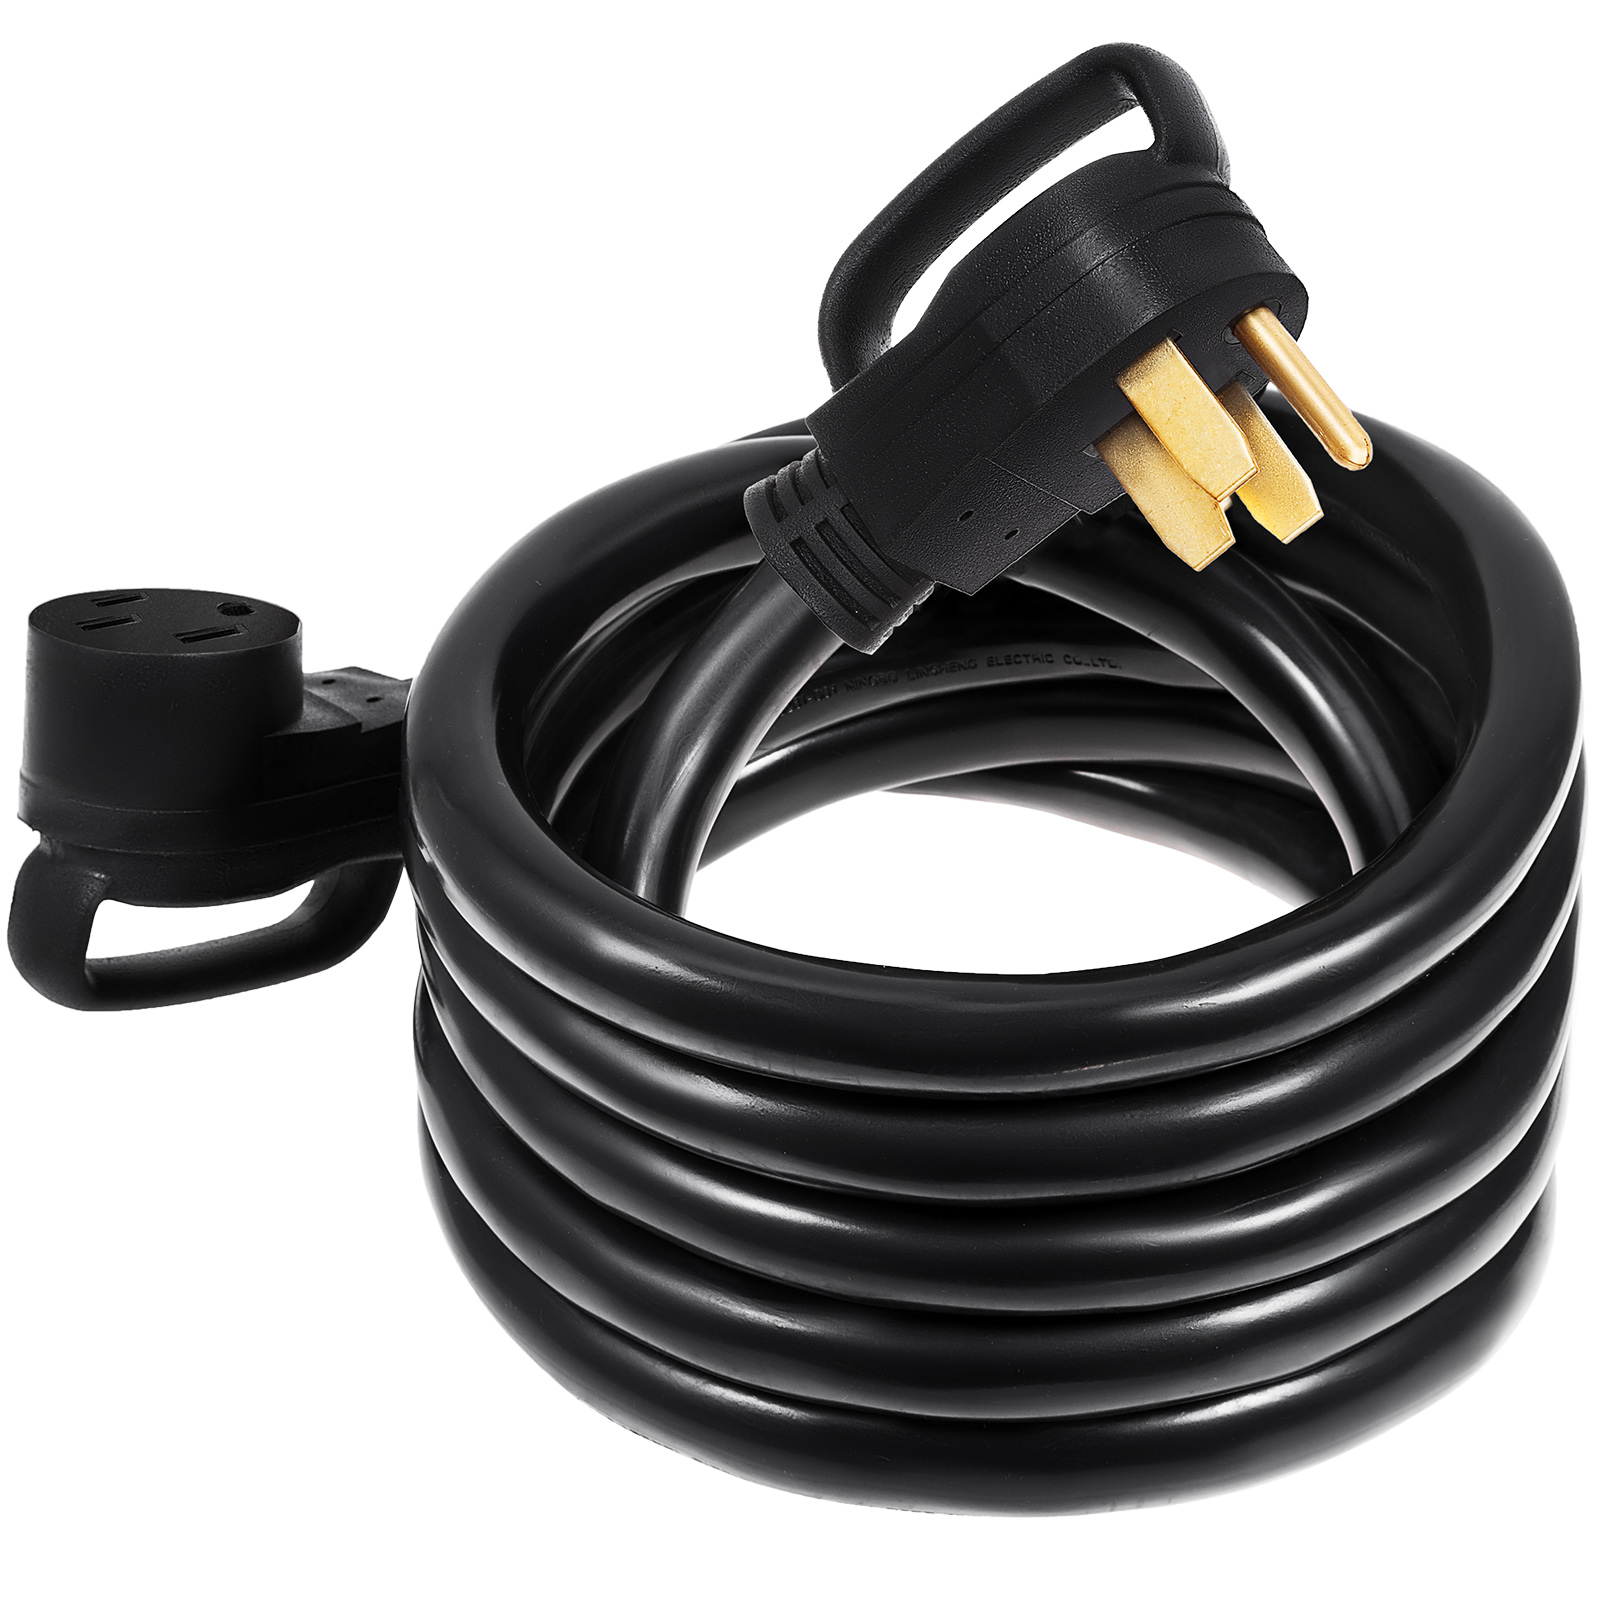 36 Ft 50AMP RV Power Extension Cord With Twist Lock 4 Wire 6/3+8/1 For Motorhome 